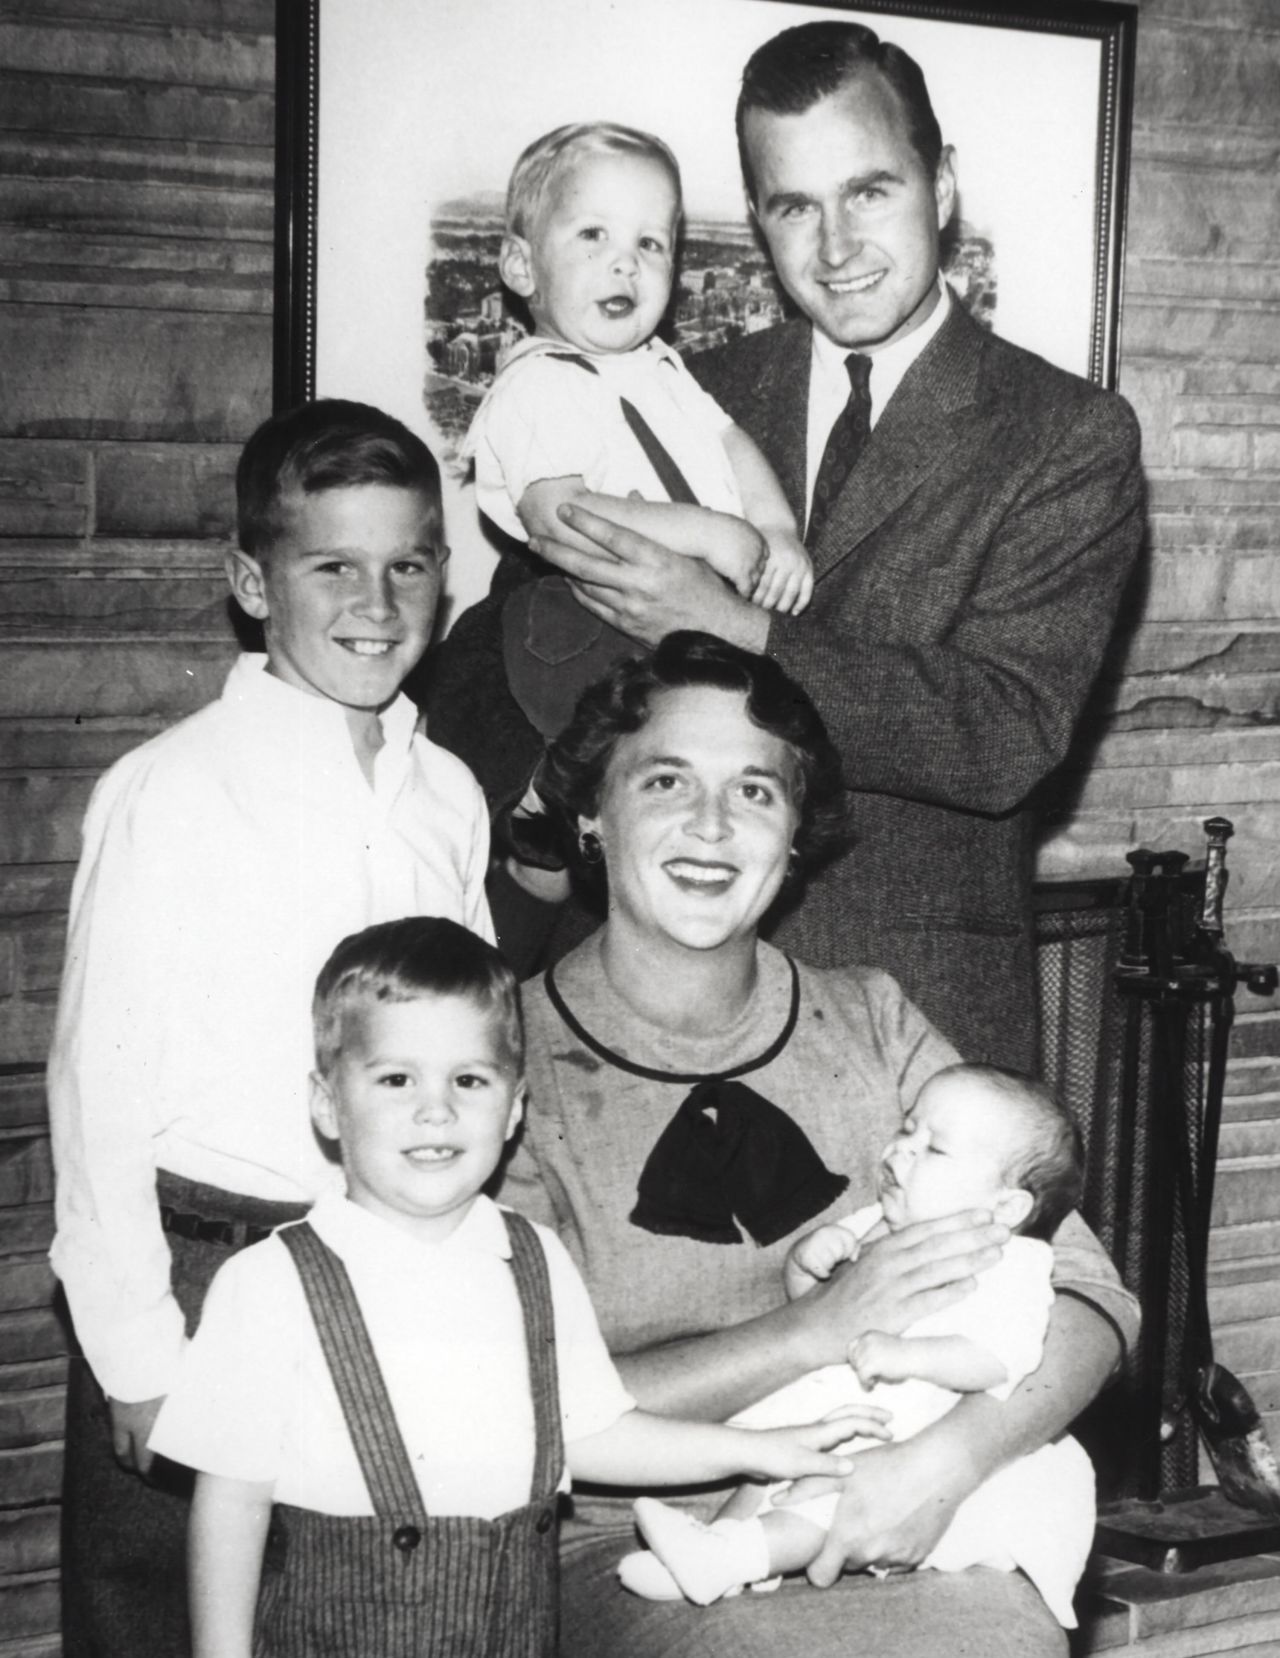 Bush, left, is the eldest child of George and Barbara Bush. Barbara is holding her youngest son, Marvin, and her husband is holding their son Neil. At bottom left is their son Jeb. The couple also had a young daughter, Robin, who died from leukemia in 1953.